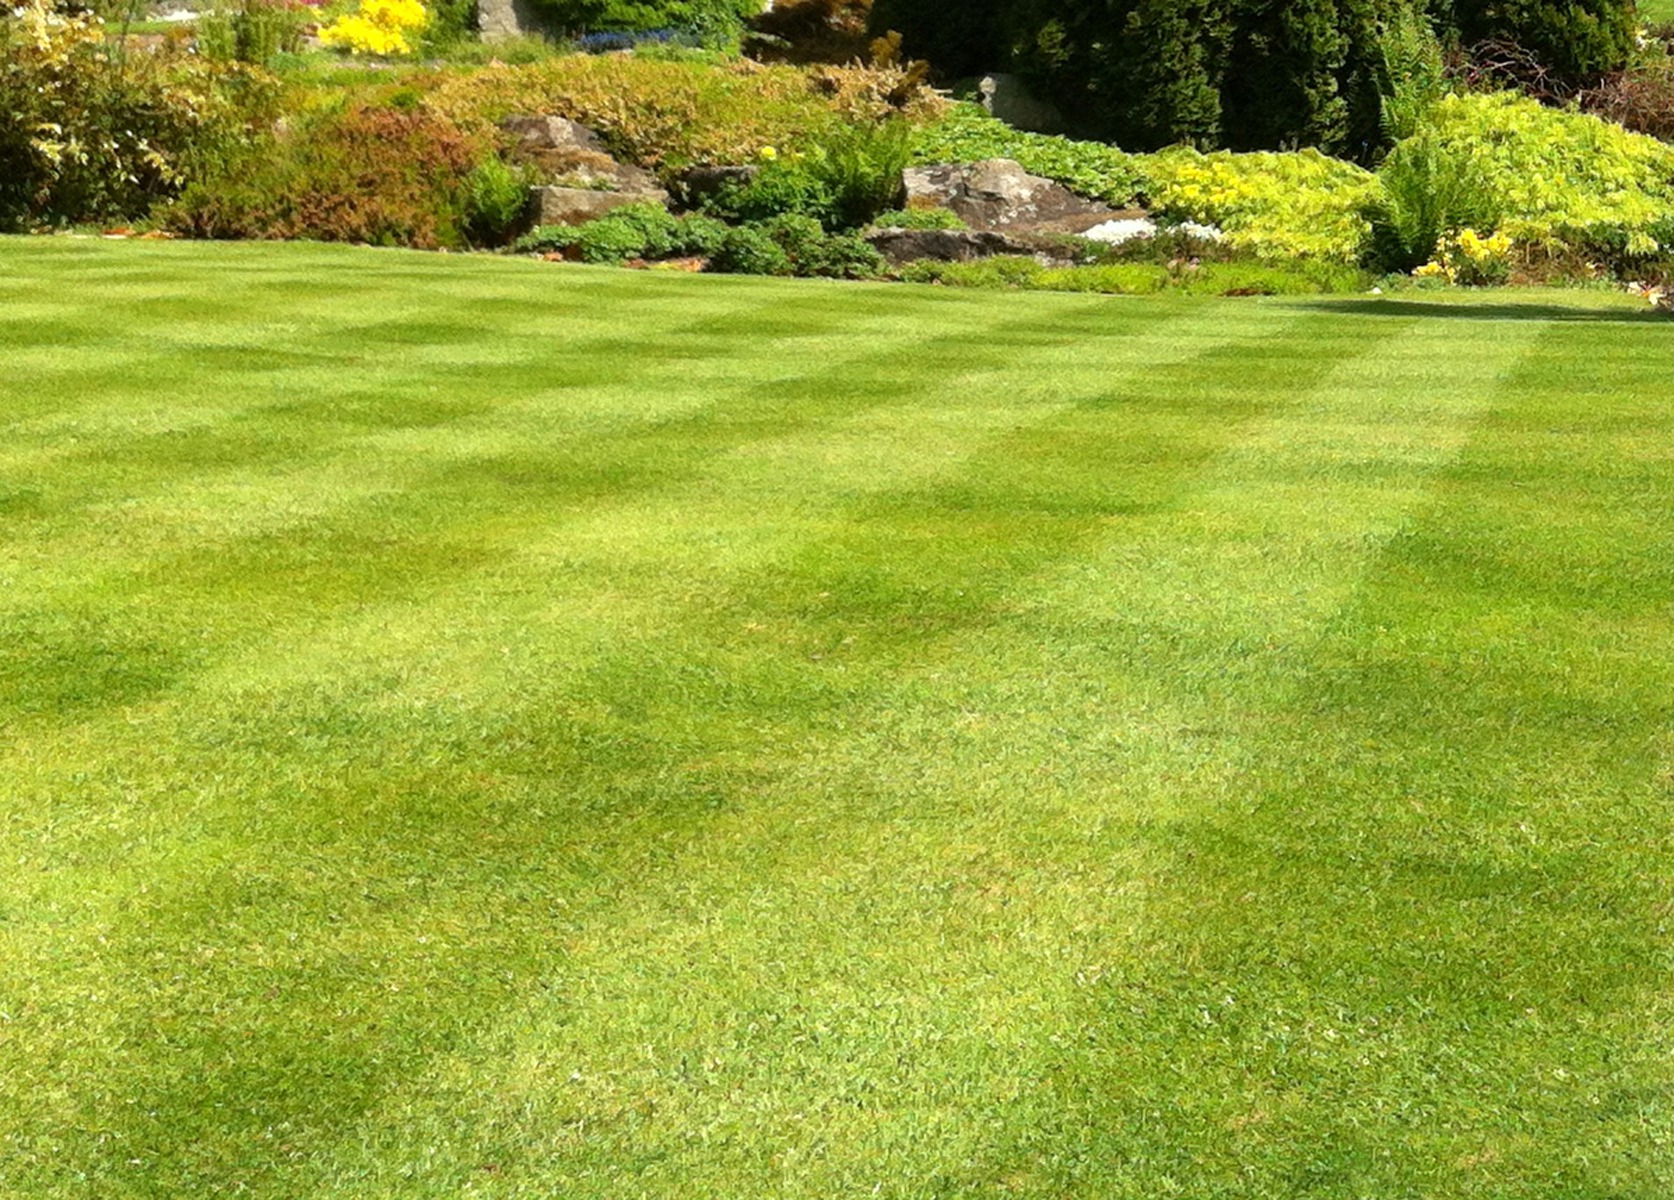 A neatly mowed lawn with striped patterns. In the background, a rockery with various shrubs and flowers bathed in sunlight is visible.